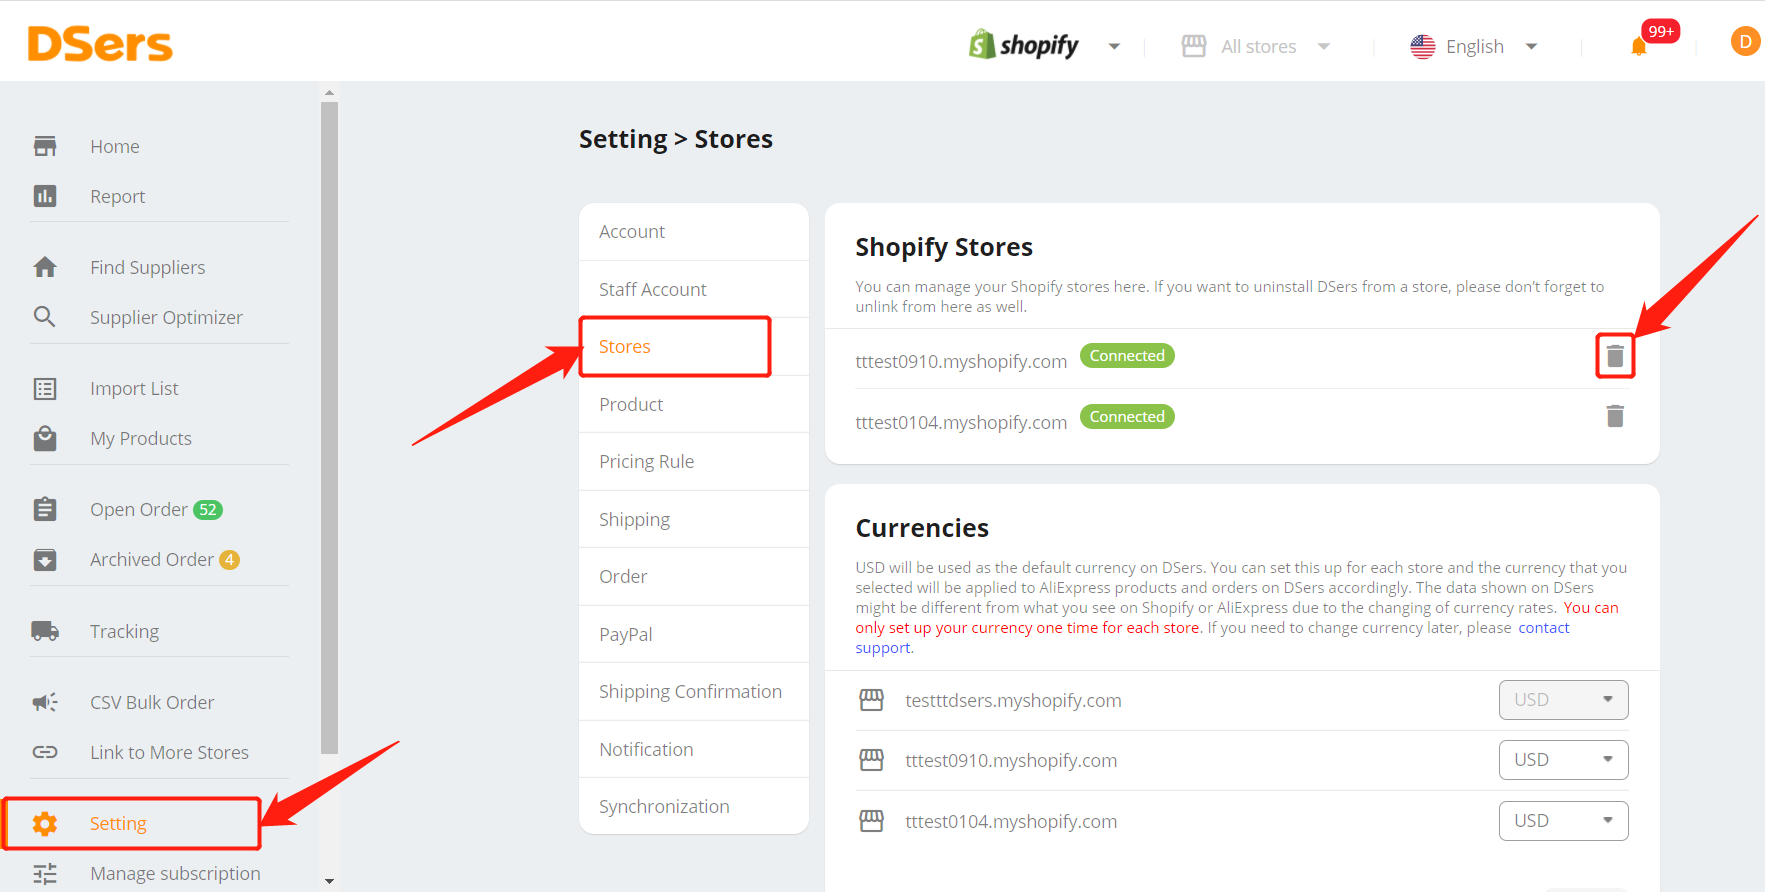 Remove a Shopify Store - Go Setting - Store - Trash icon - DSers